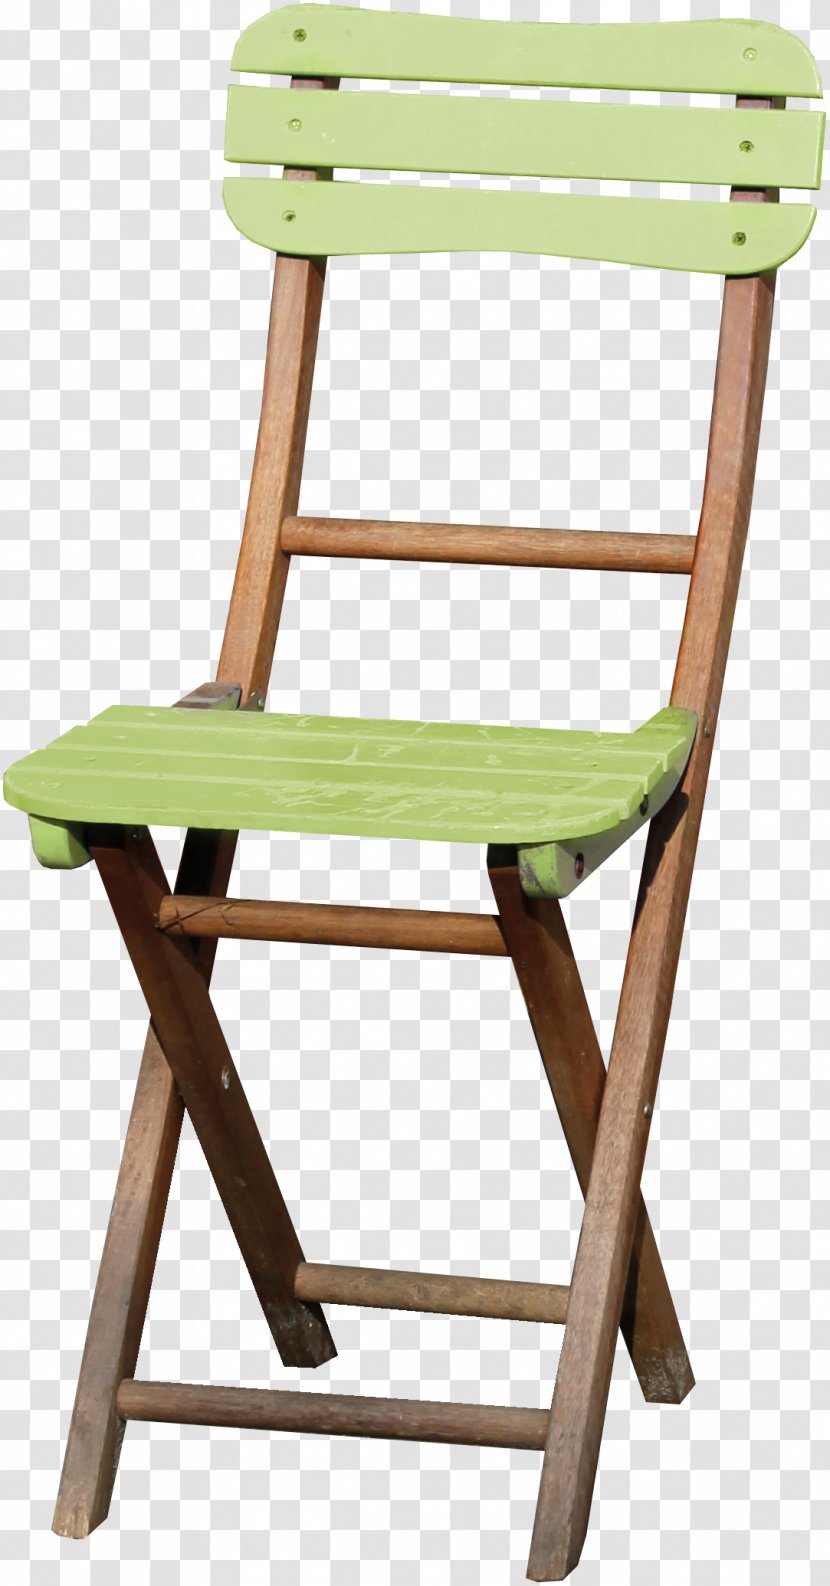 Chair Bench Stool - Wooden Chairs Transparent PNG